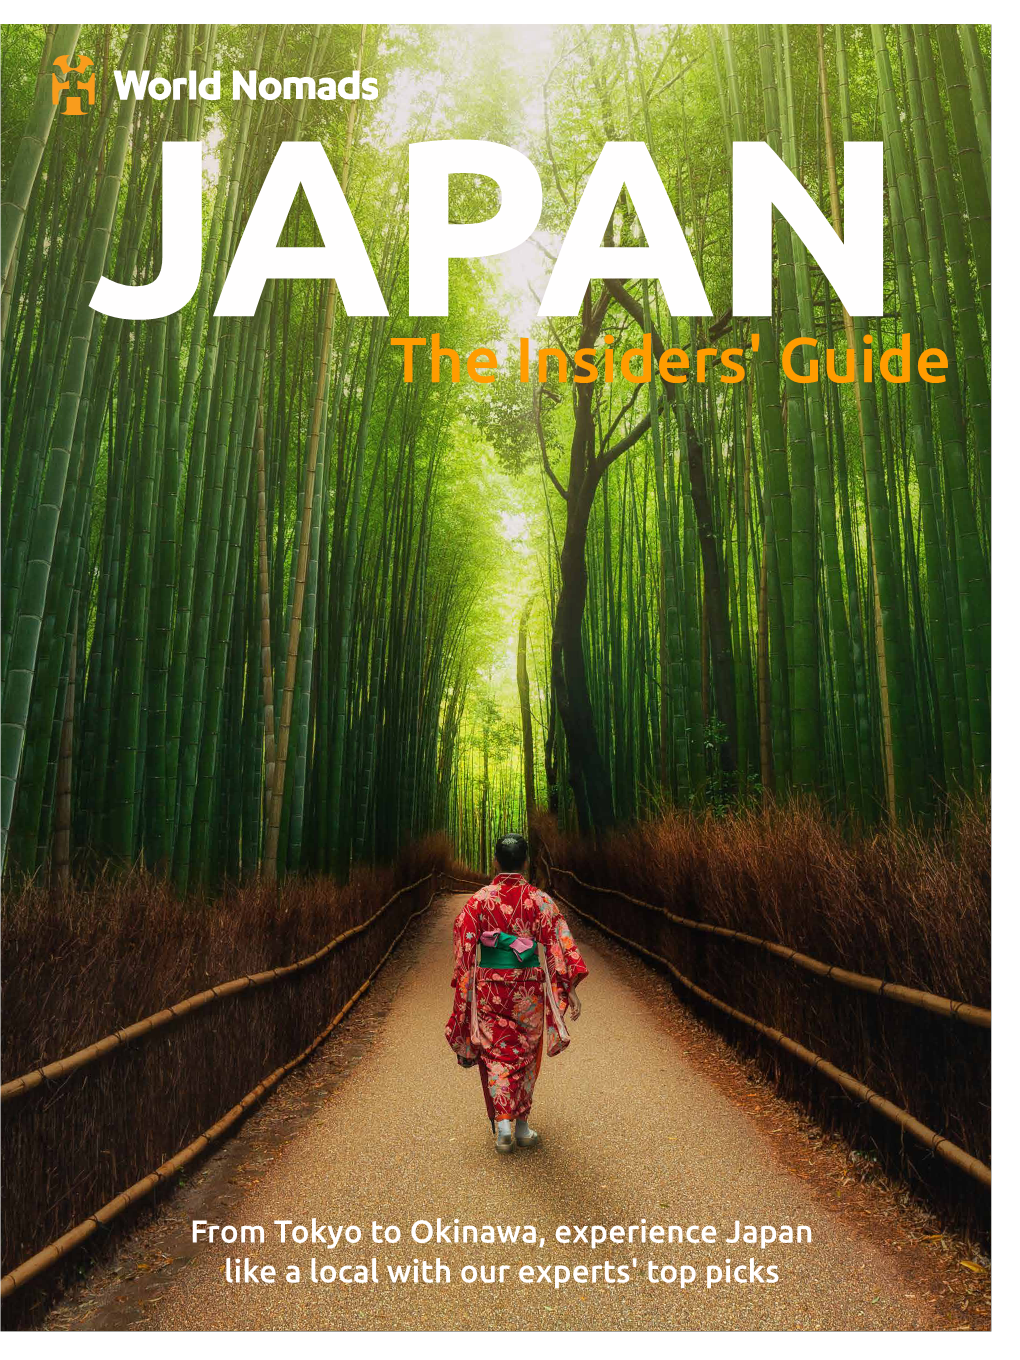 From Tokyo to Okinawa, Experience Japan Like a Local with Our Experts' Top Picks Contents